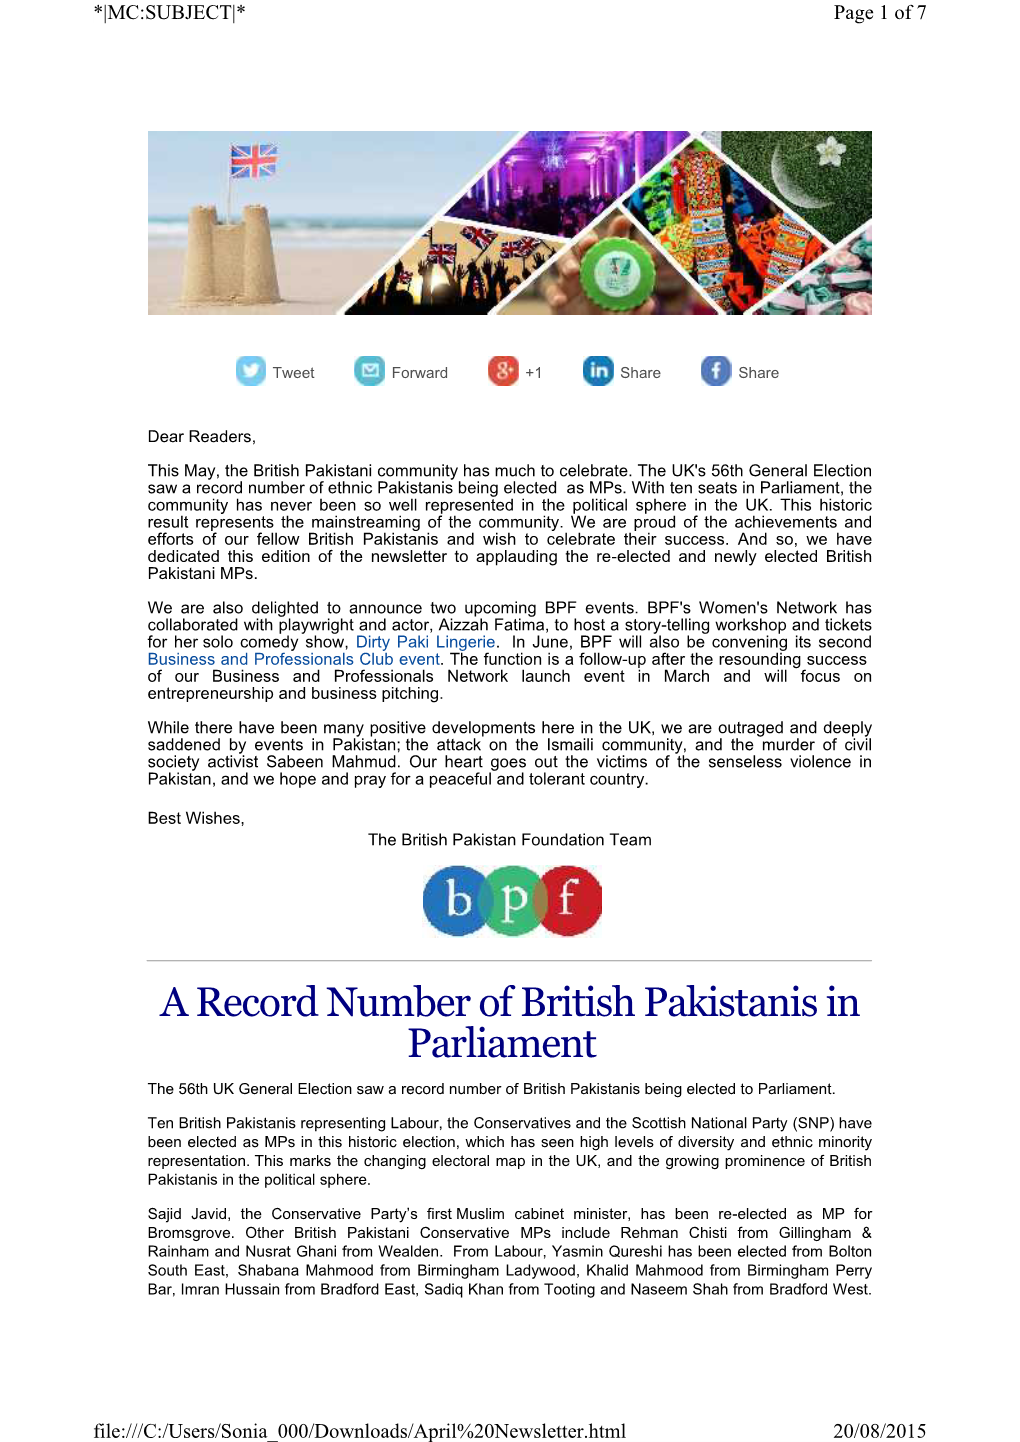 A Record Number of British Pakistanis in Parliament the 56Th UK General Election Saw a Record Number of British Pakistanis Being Elected to Parliament